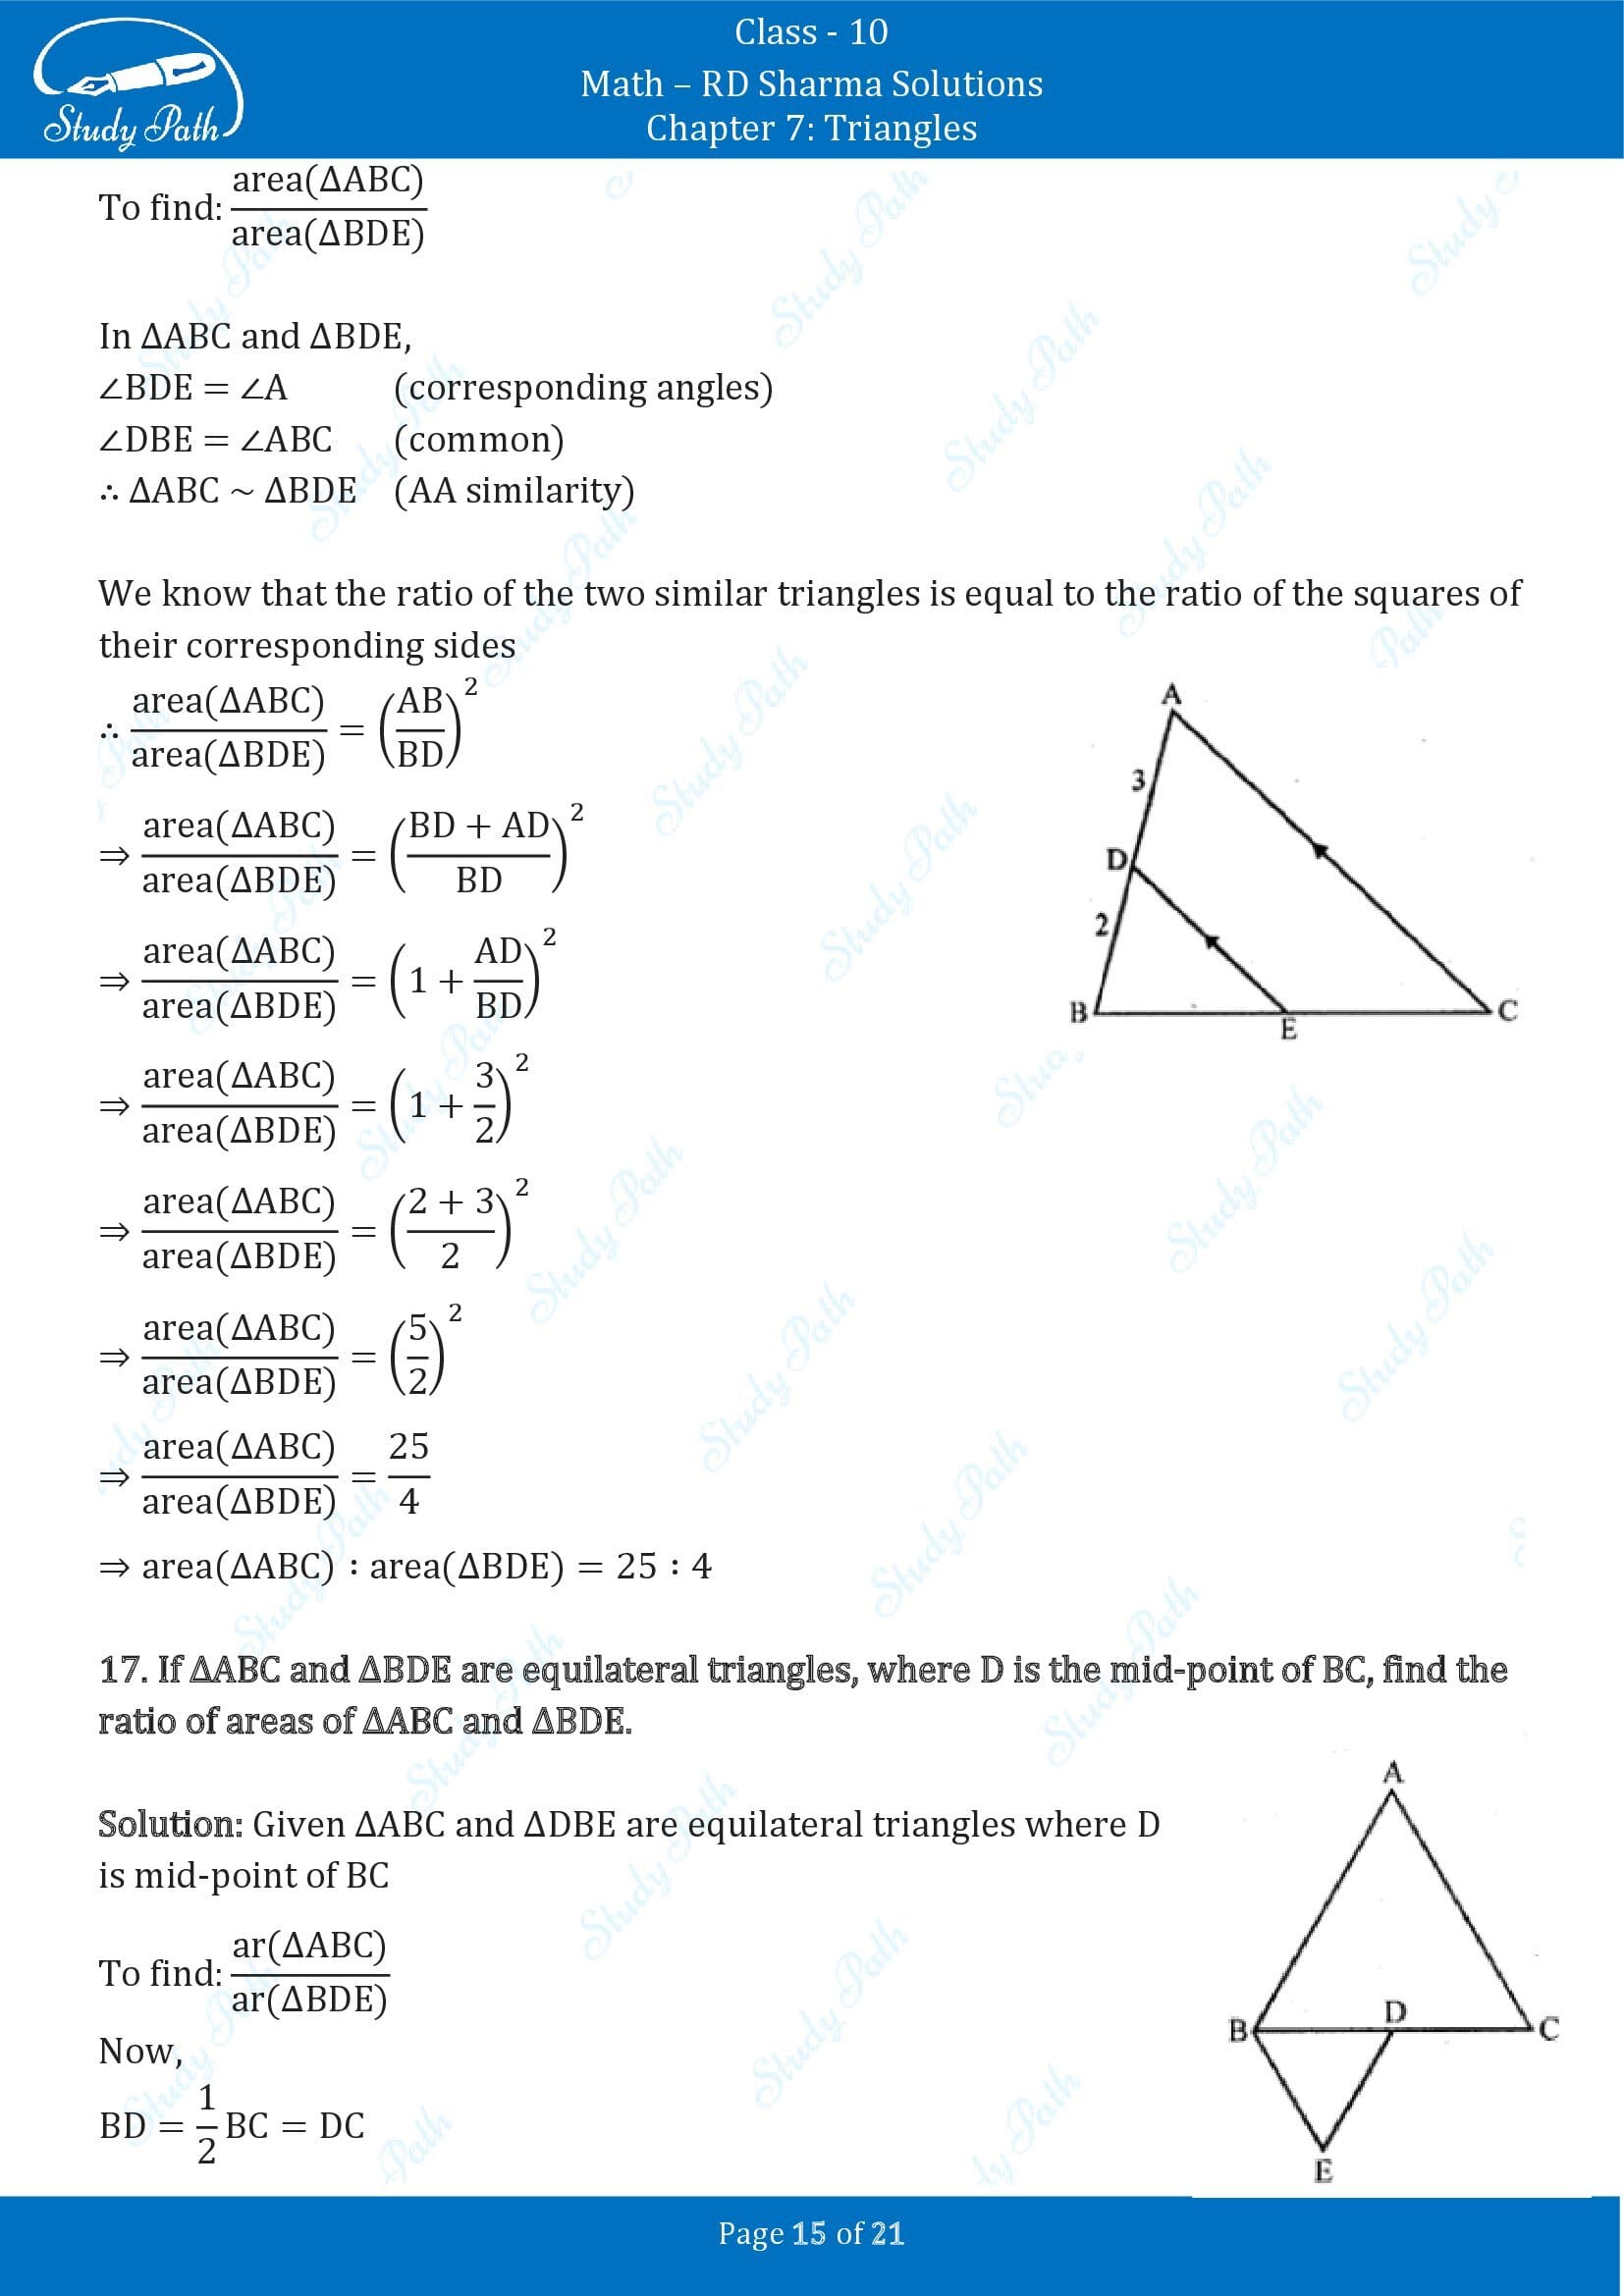 RD Sharma Solutions Class 10 Chapter 7 Triangles Exercise 7.6 00015